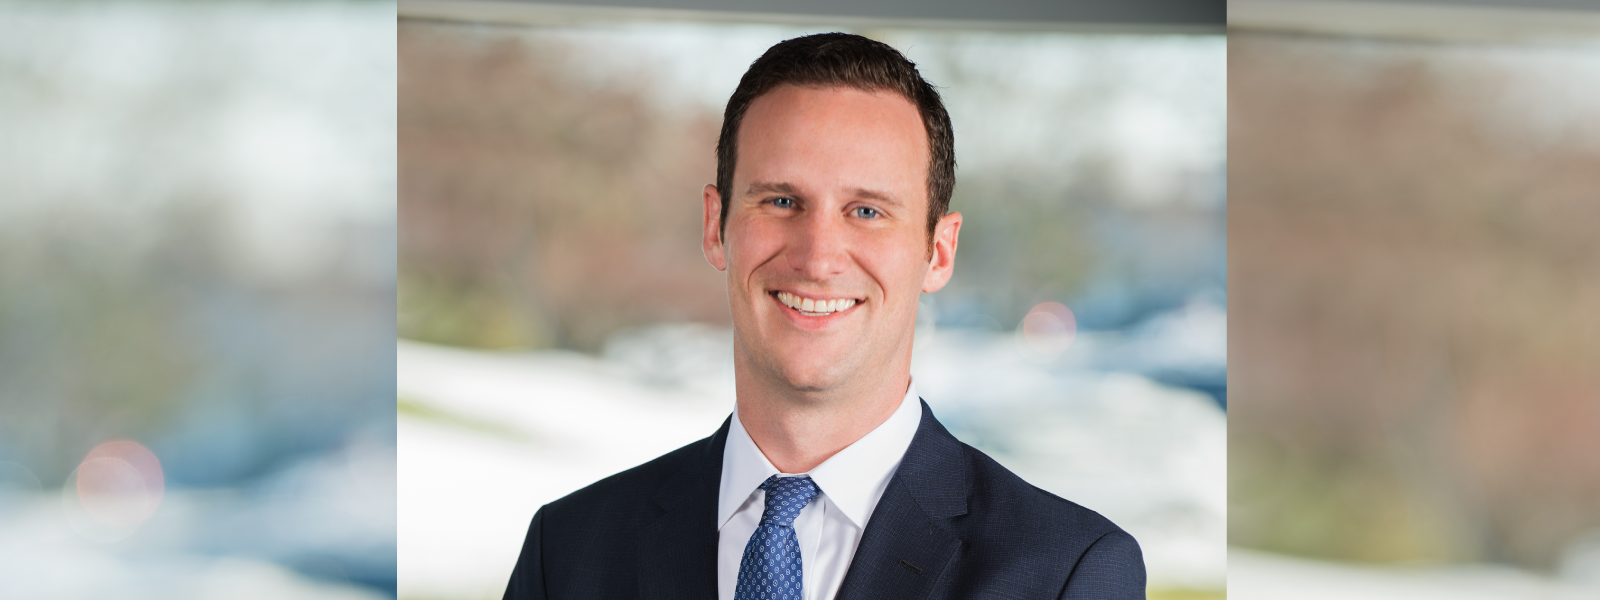 Pine Tree promotes Conor Bossy to Chief Investment Officer